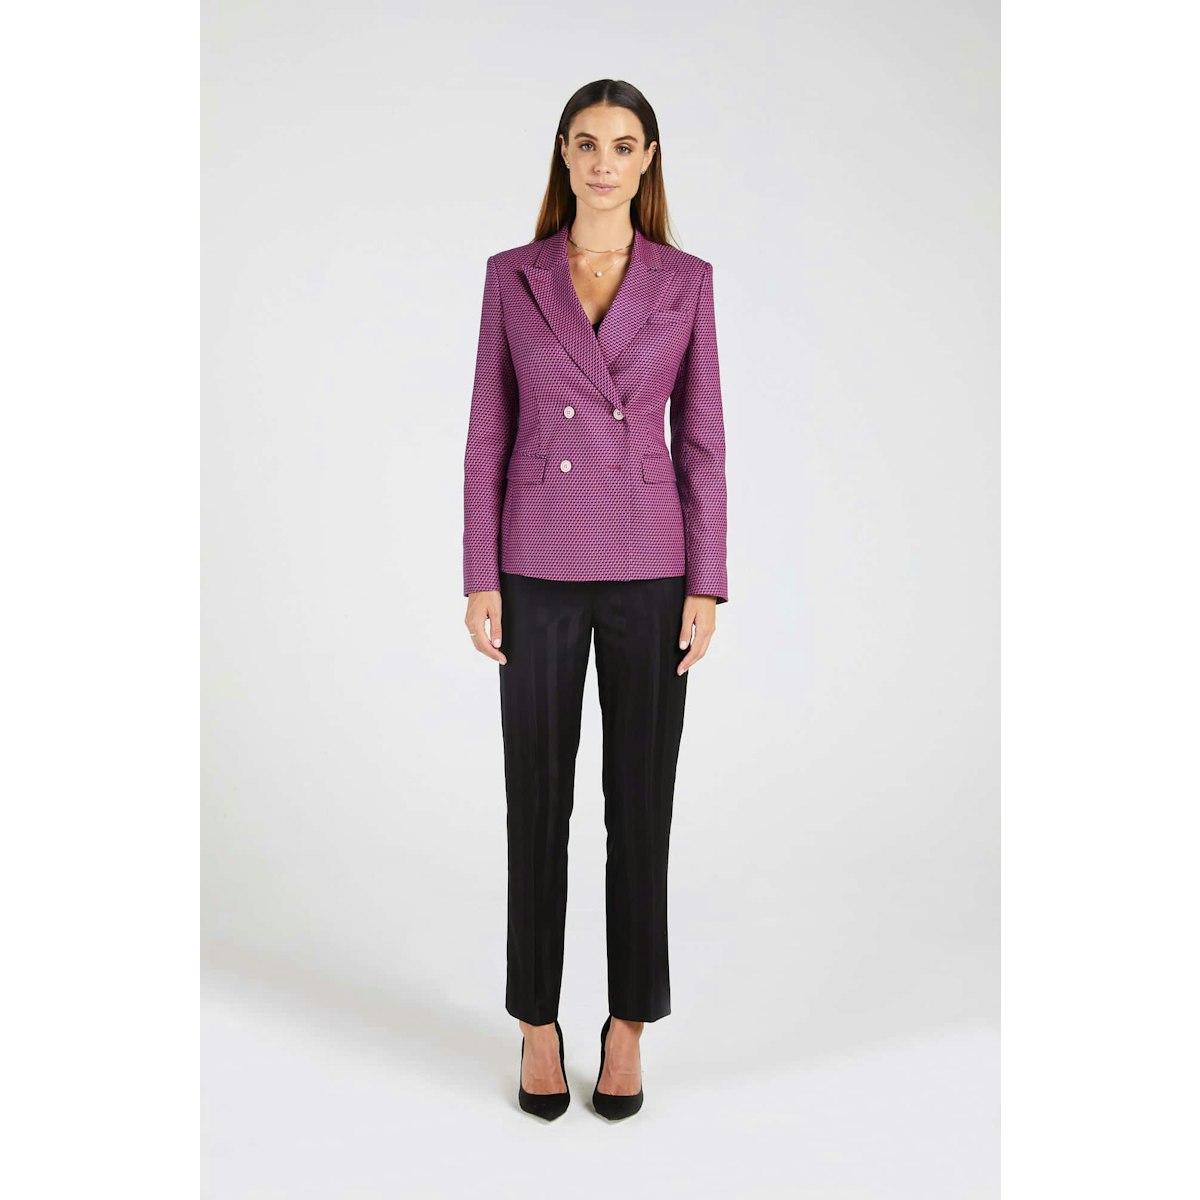 InStitchu Collection The Franklin Pink and Purple Zig-Zag Jacket